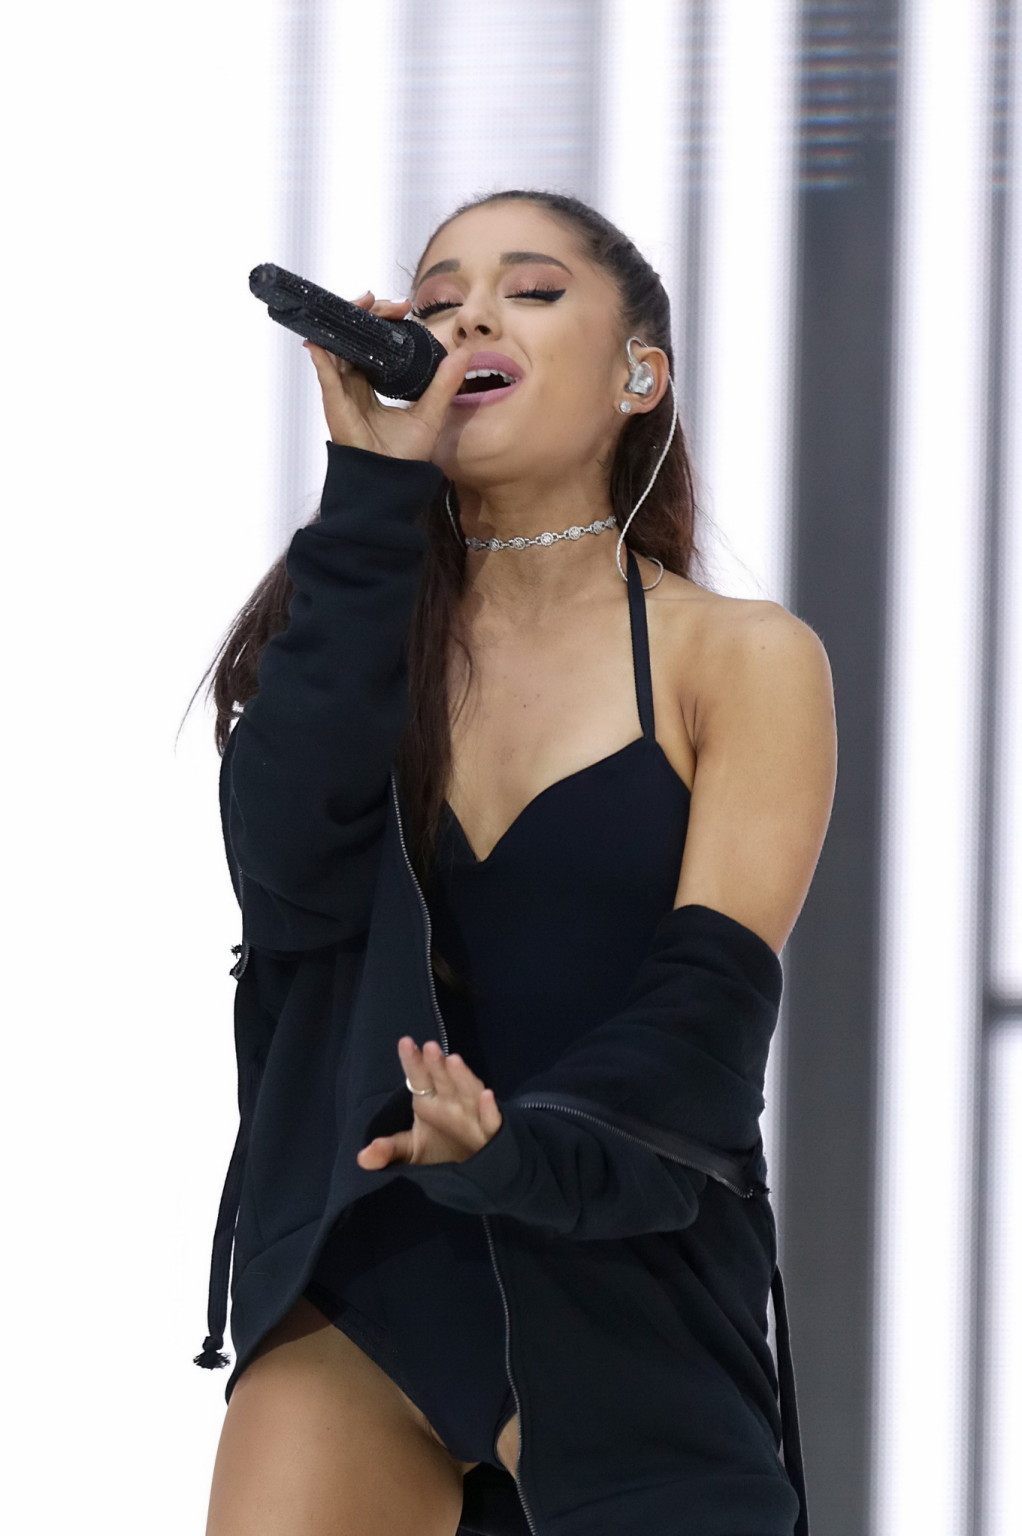 Ariana Grande shows off her shaved pussy in a tiny black outfit while performing #75161906